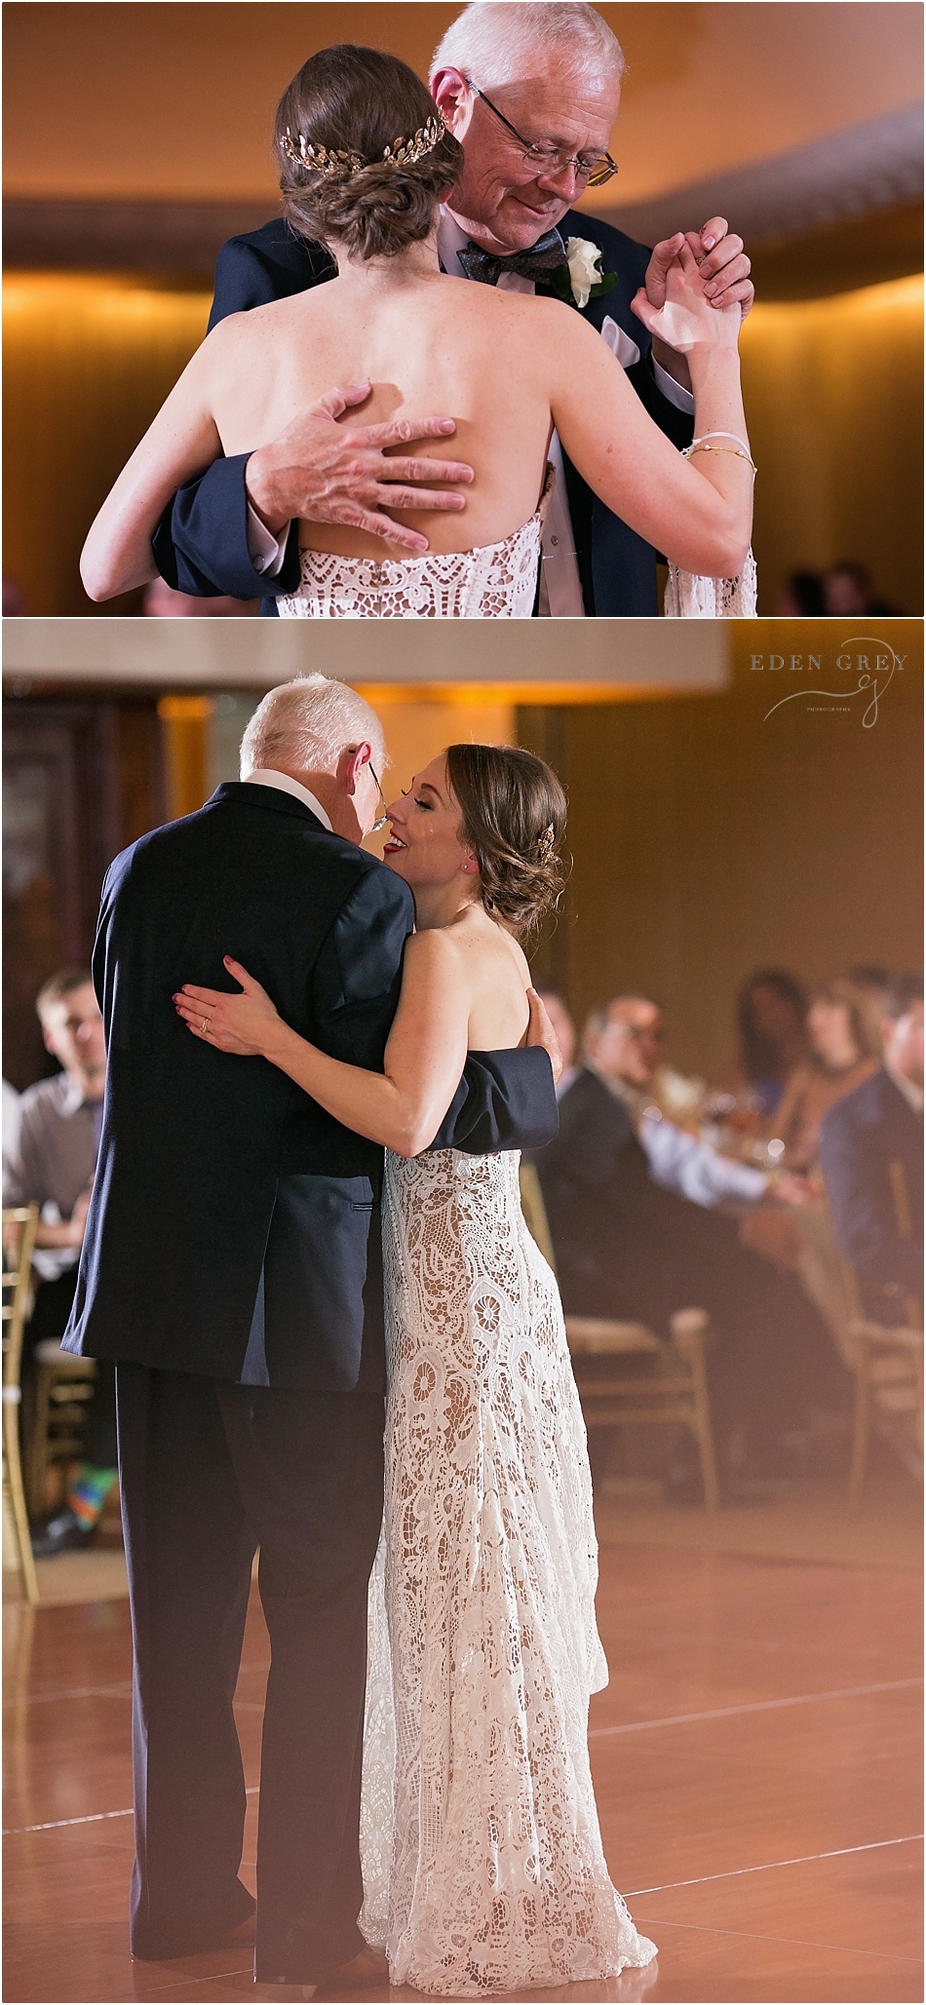 Emotional bride with her father during dance